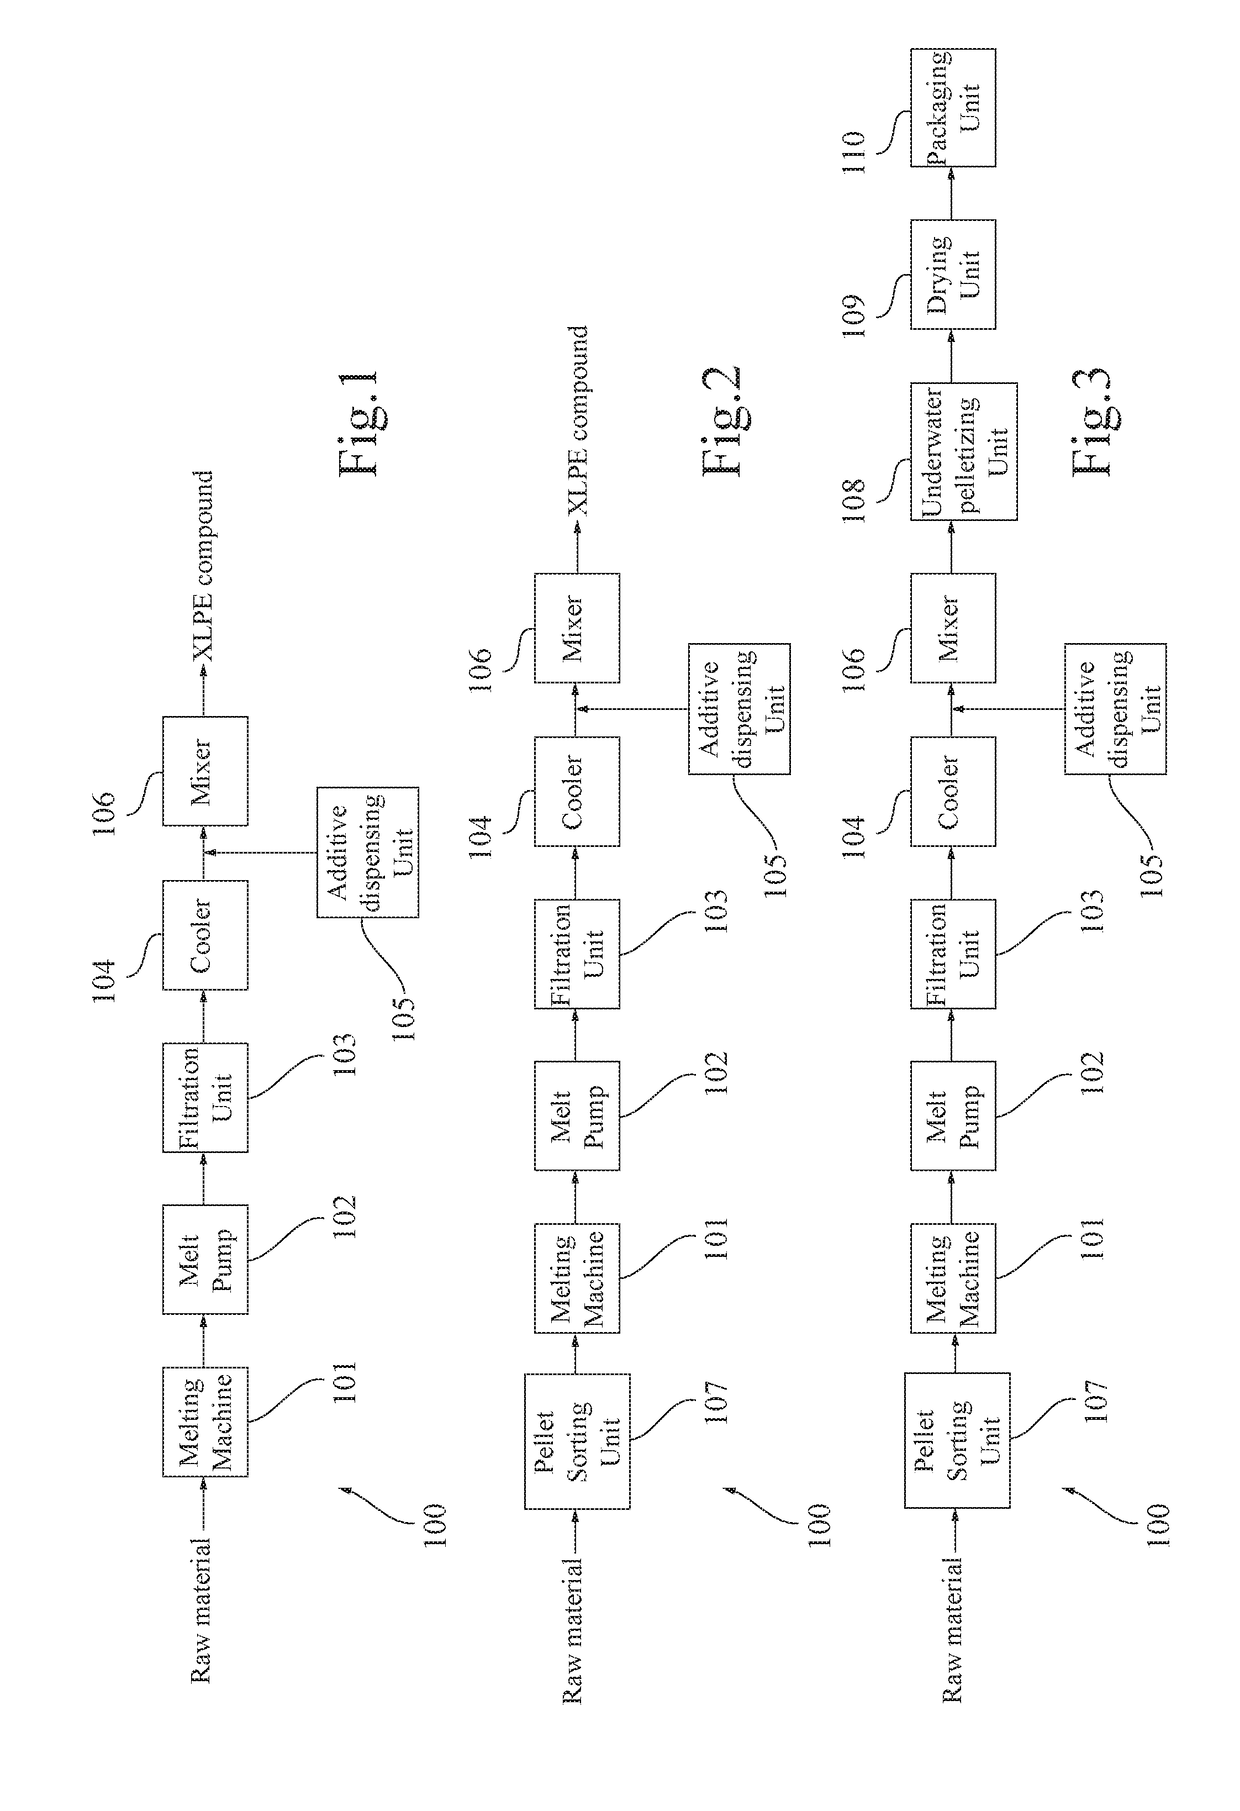 Installation and method for manufacturing cross-linkable polyethylene compounds